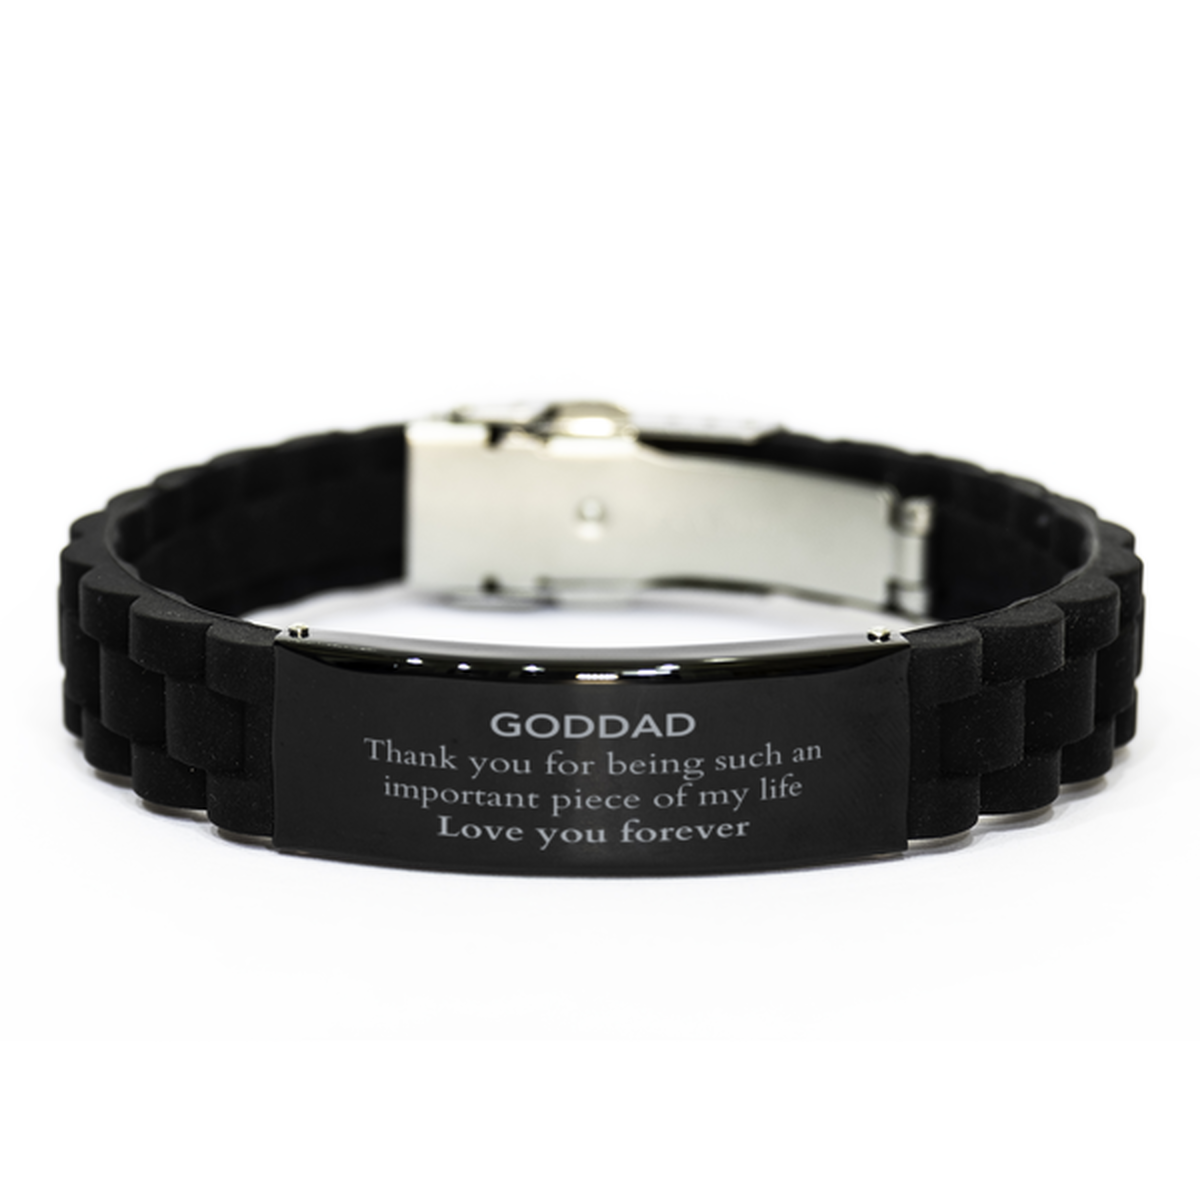 Appropriate Goddad Black Glidelock Clasp Bracelet Epic Birthday Gifts for Goddad Thank you for being such an important piece of my life Goddad Christmas Mothers Fathers Day